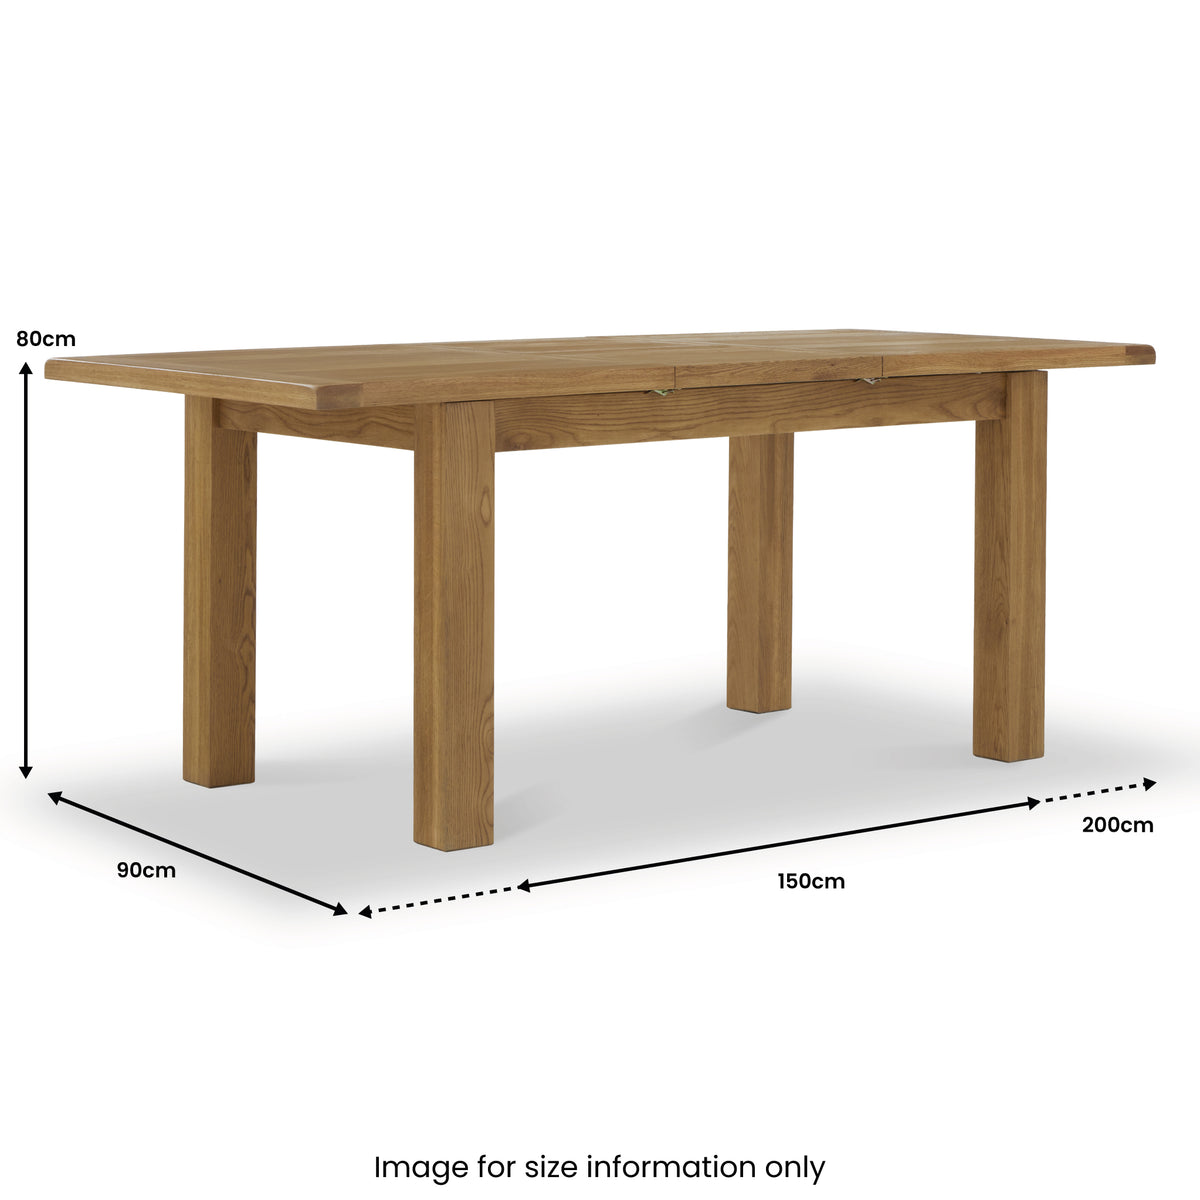 Broadway Oak Small Butterfly Extending Table dimensions